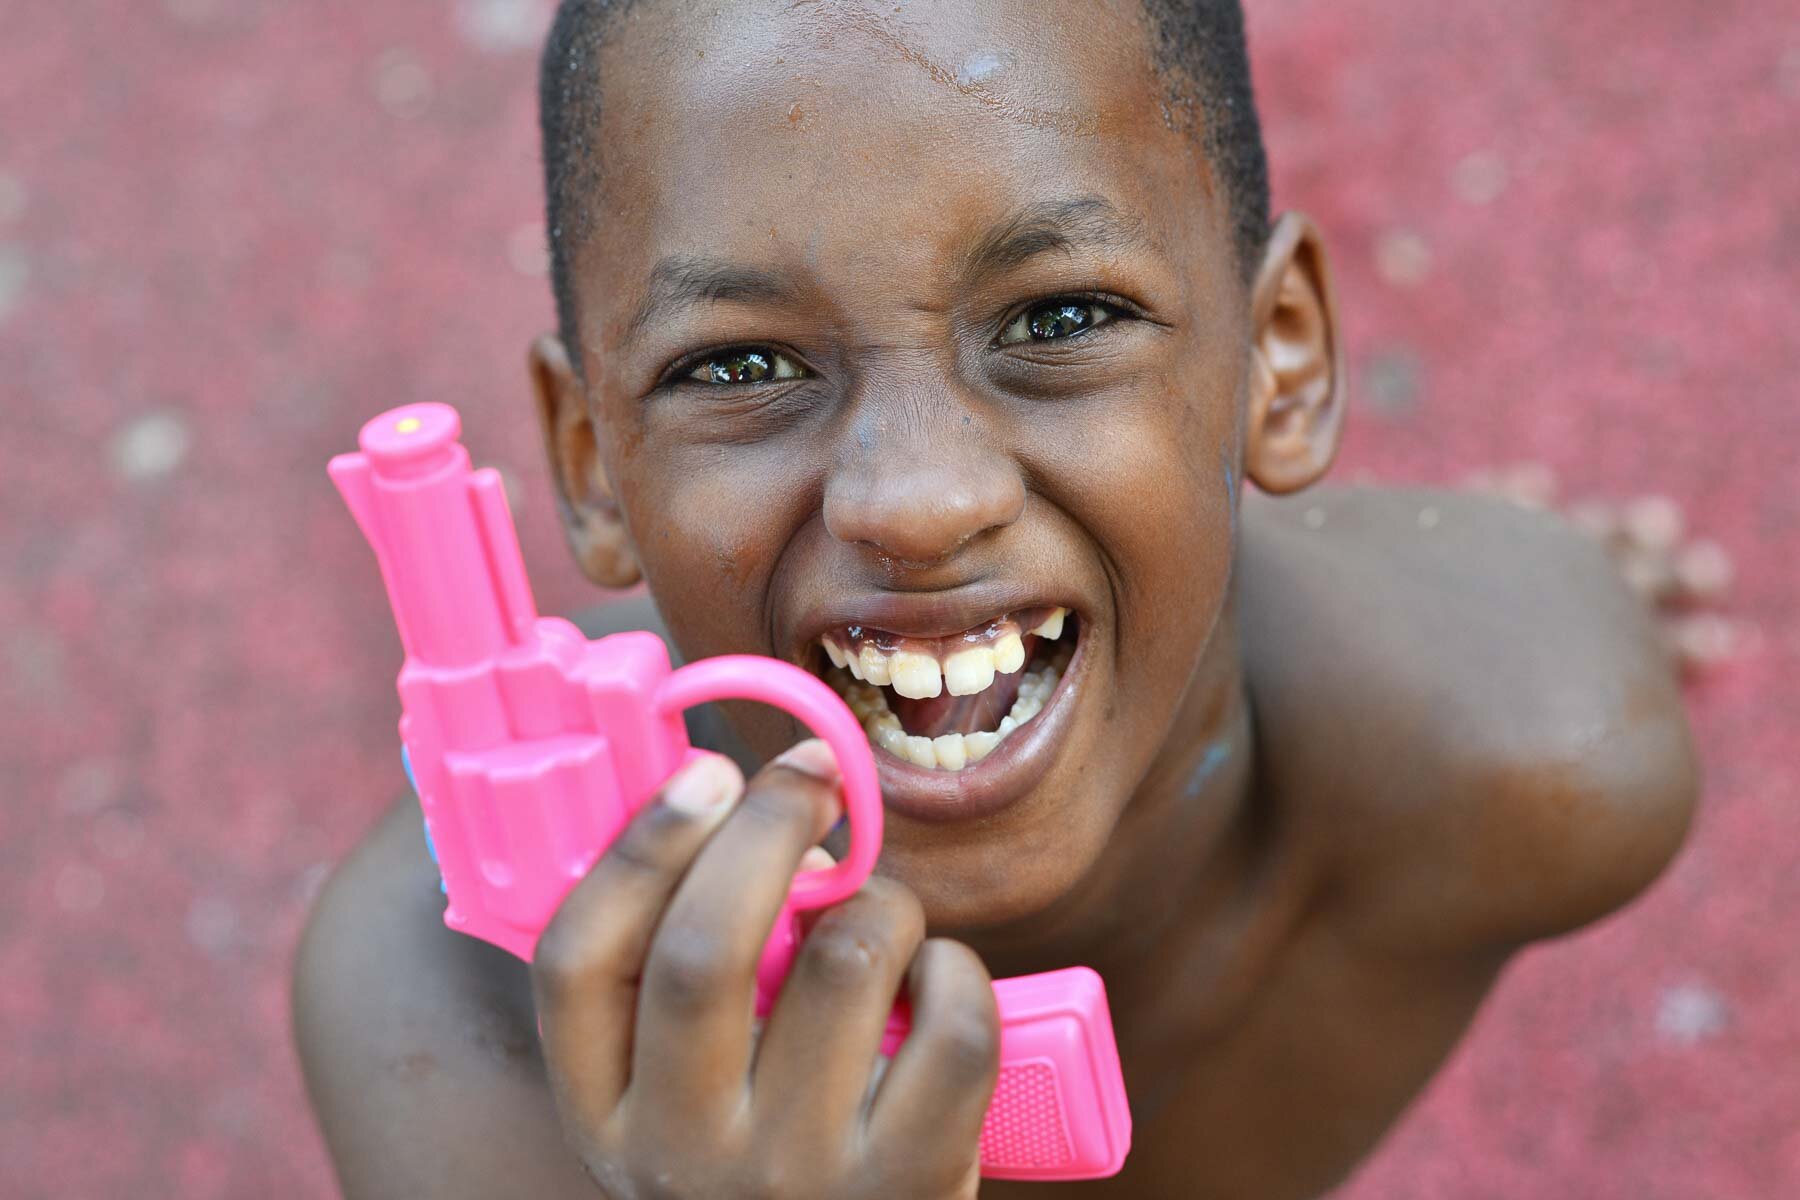  A young boy playing with a pink water-pistol. 